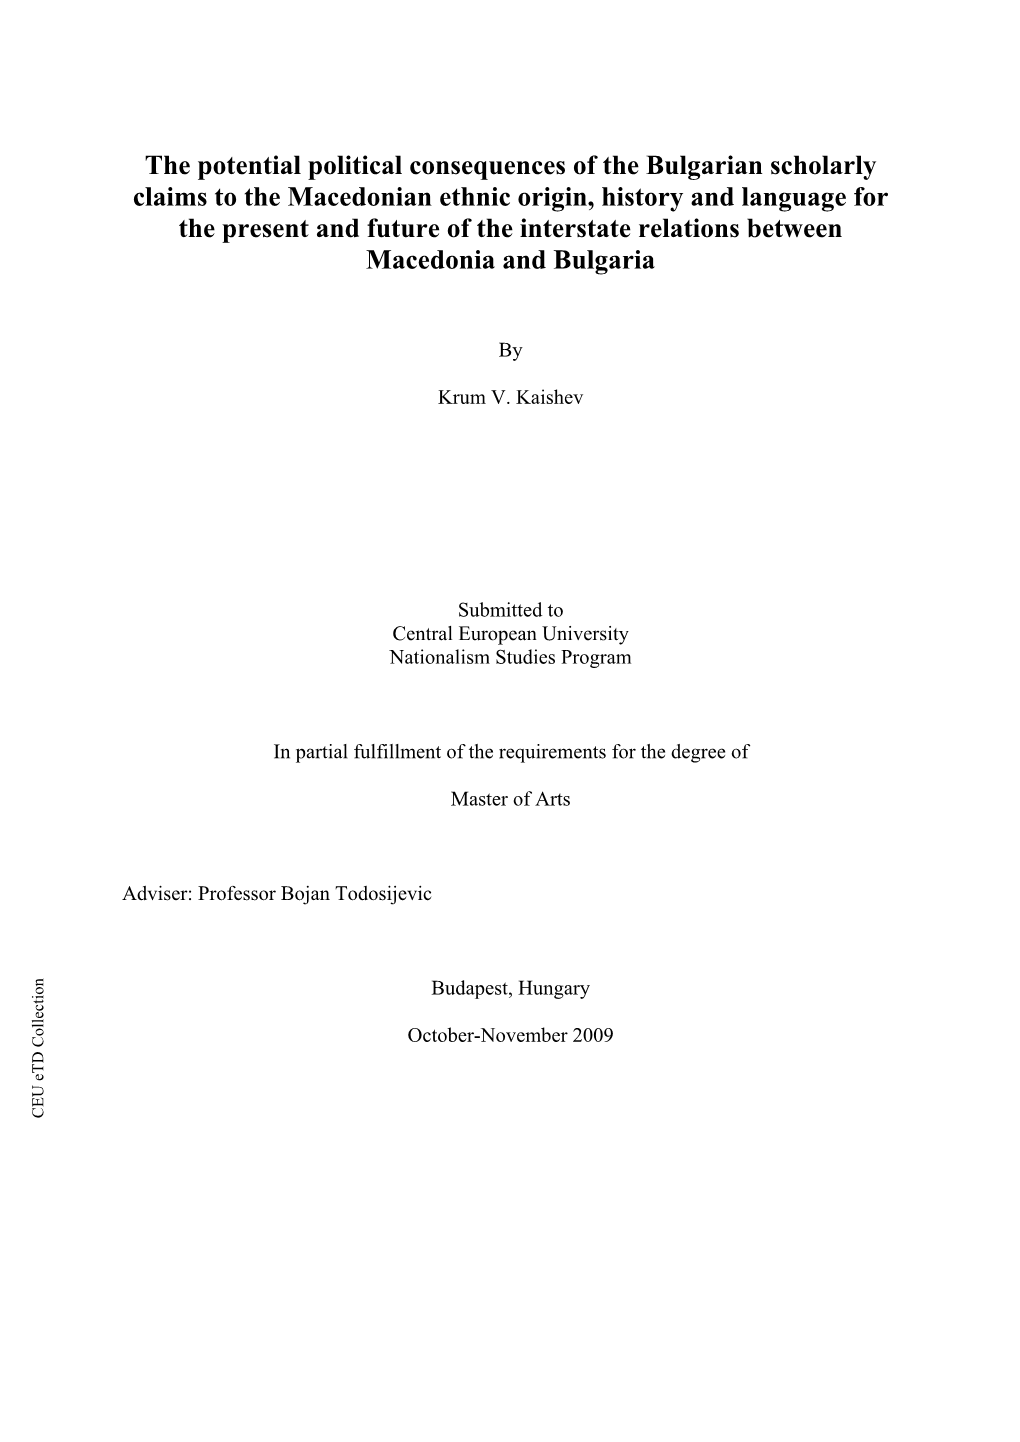 The Potential Political Consequences of the Bulgarian Scholarly